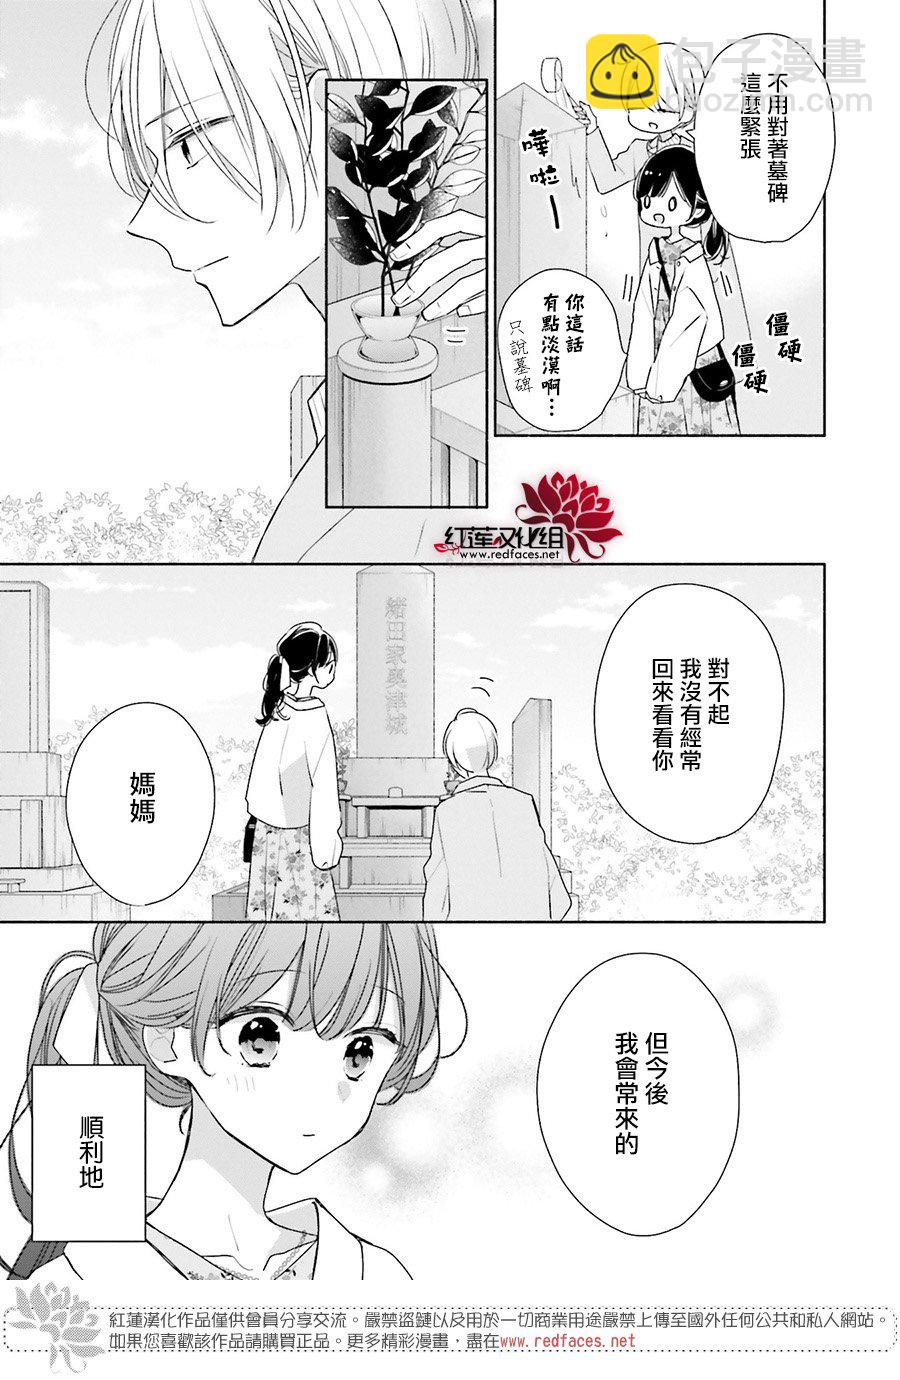 If given a second chance - 第46話(1/2) - 5